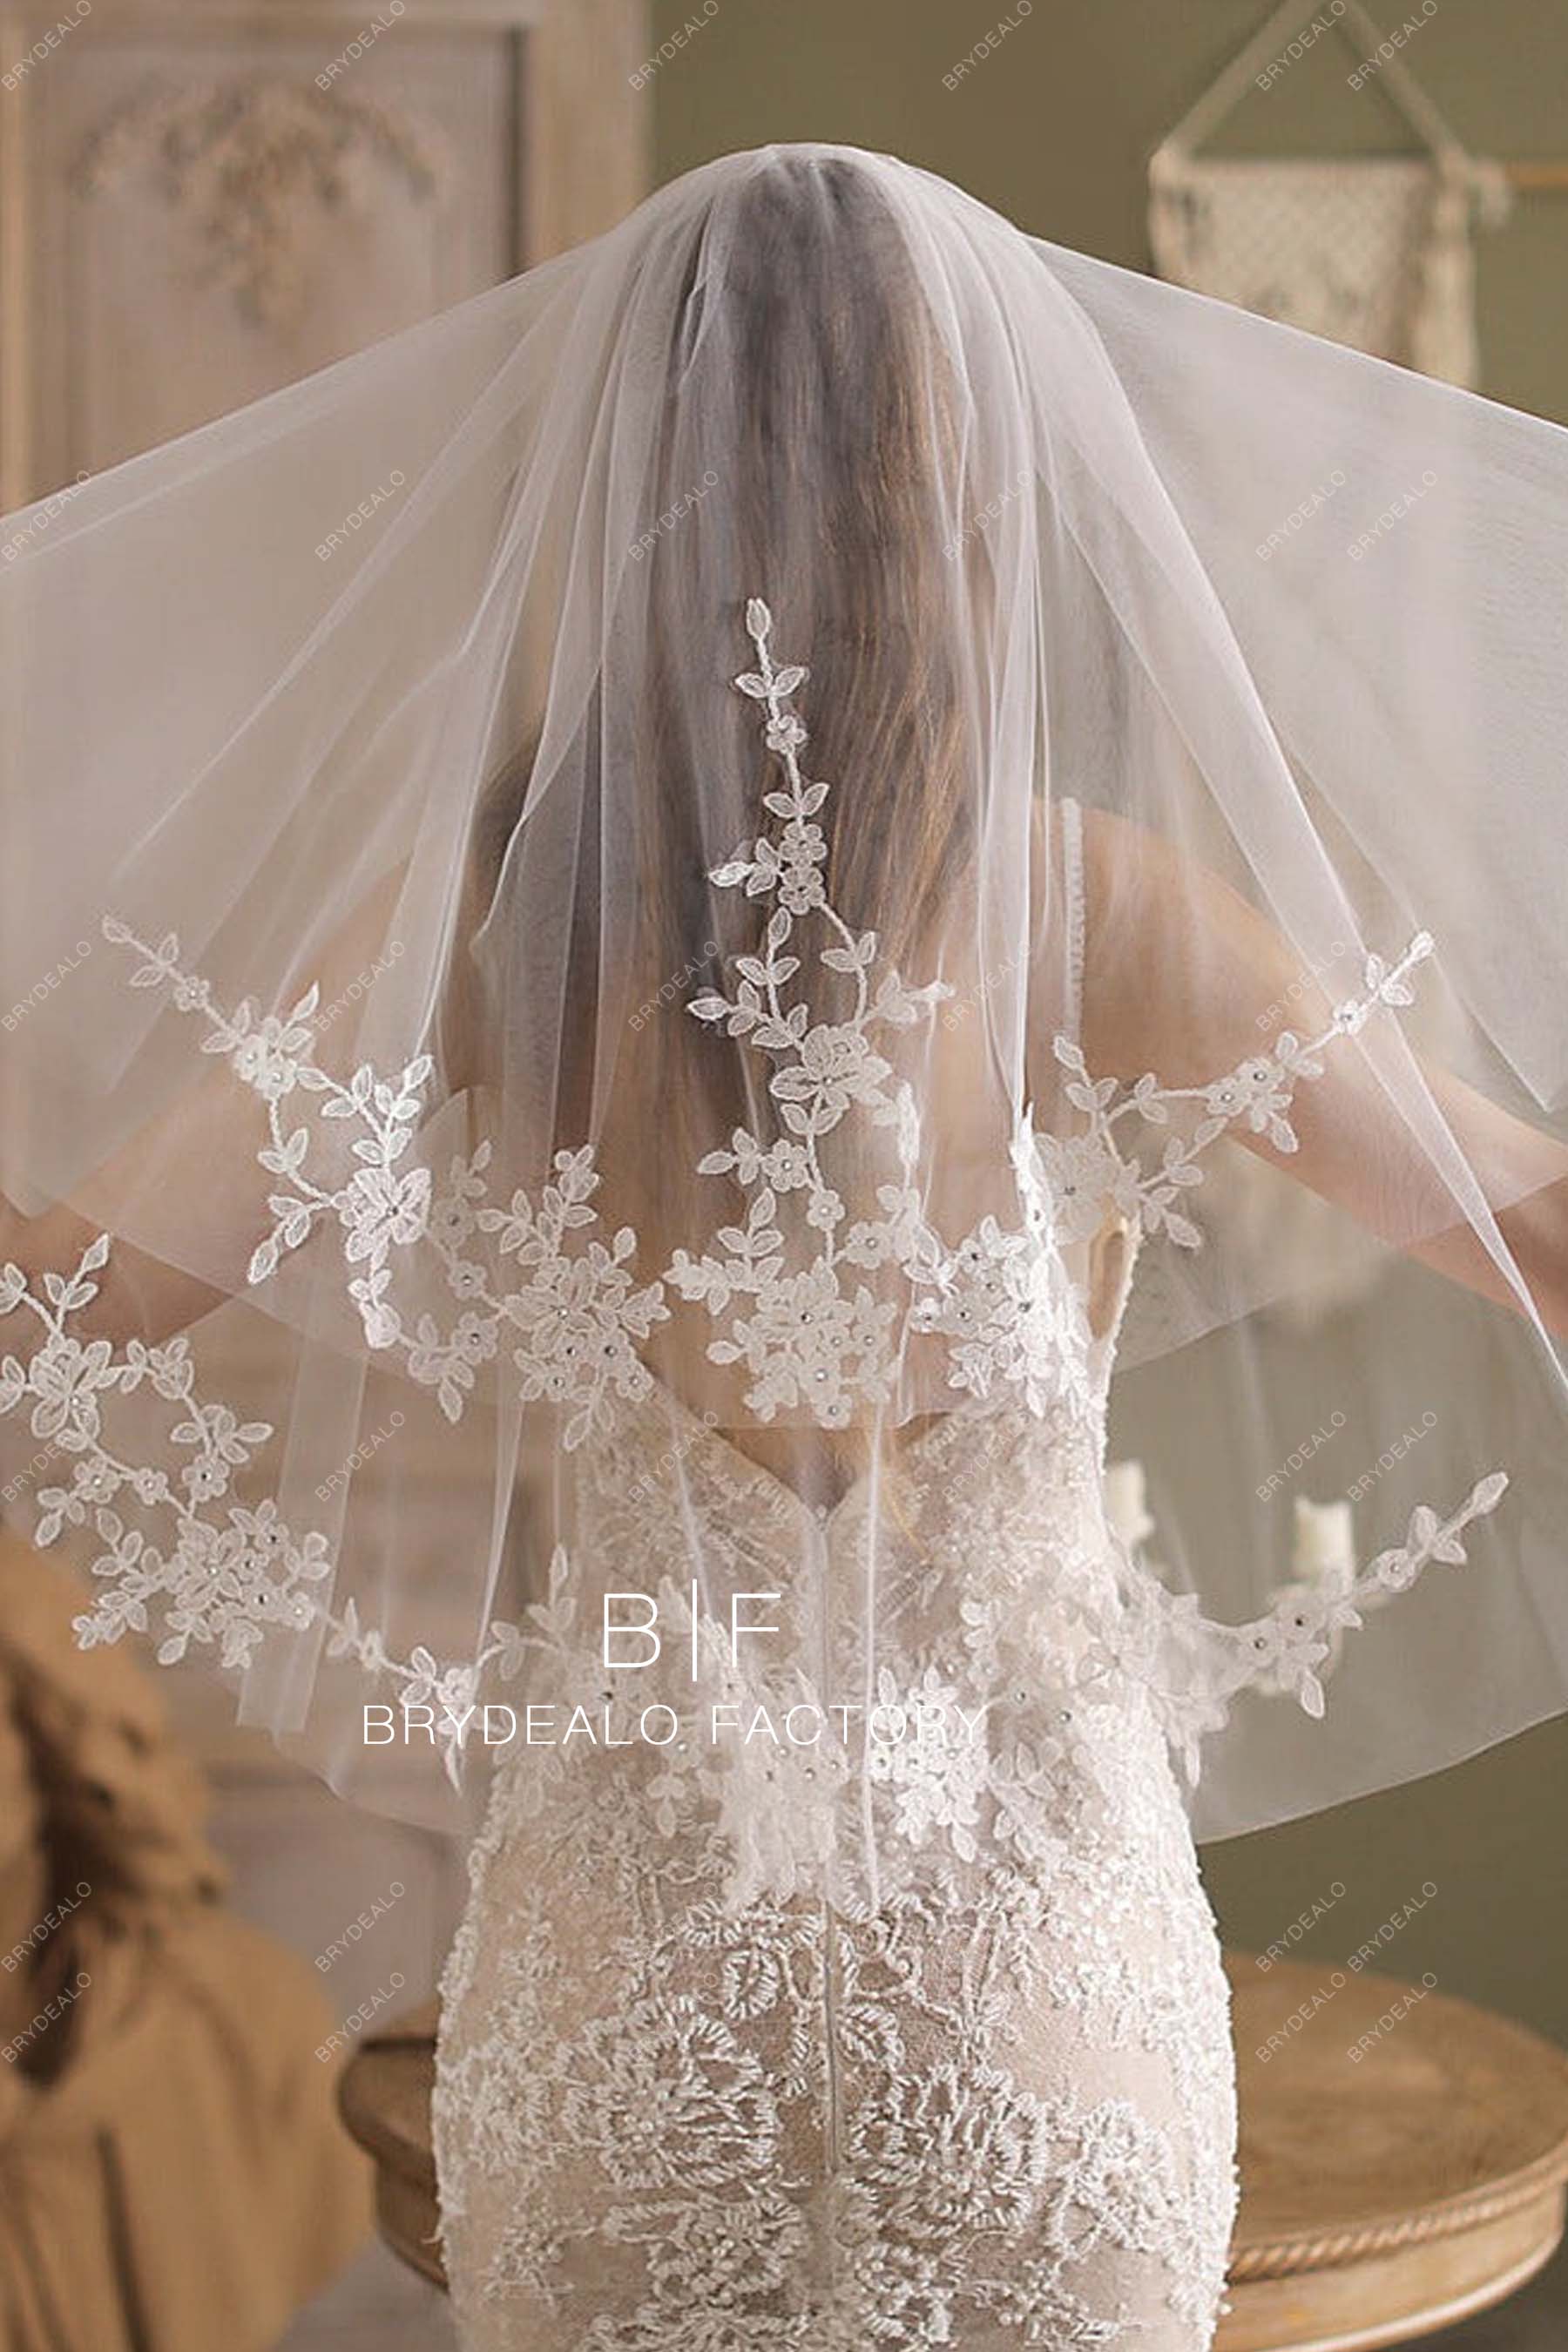 Loulou - tulle bridal veil - bridal accessories - WED2B